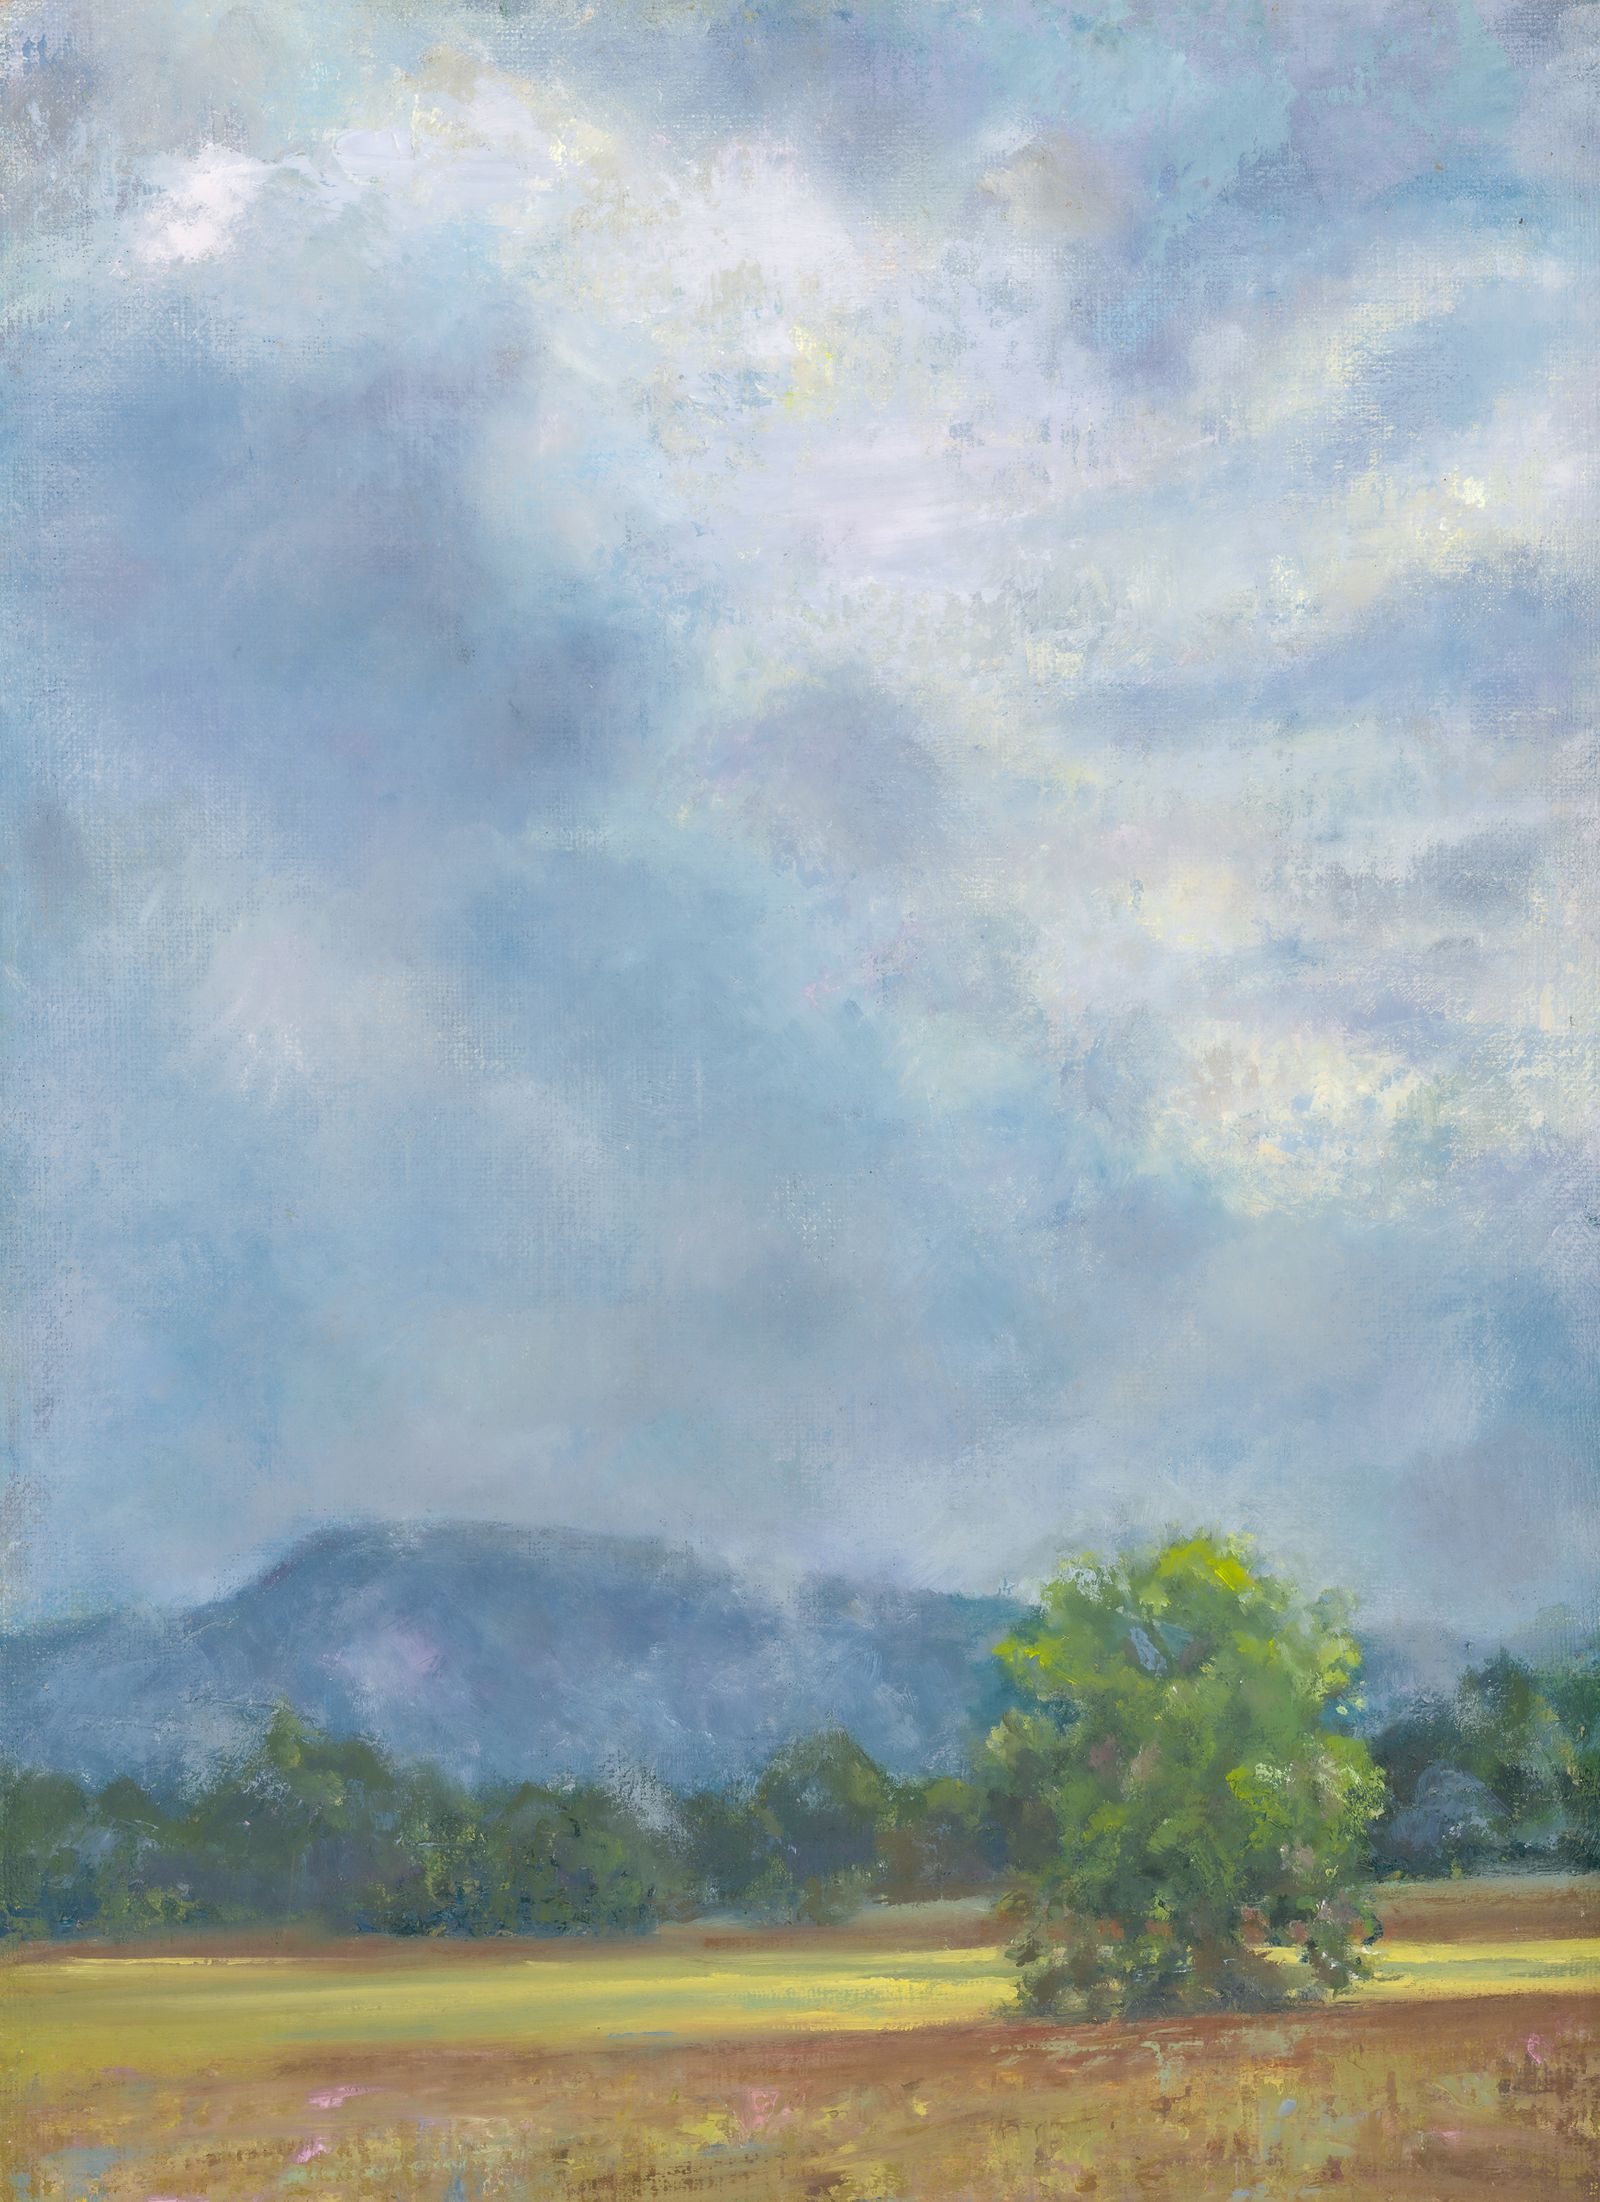 An oil painting on linen of sunlight breaking through clouds and shining on a tree and field with low mountains in the background.